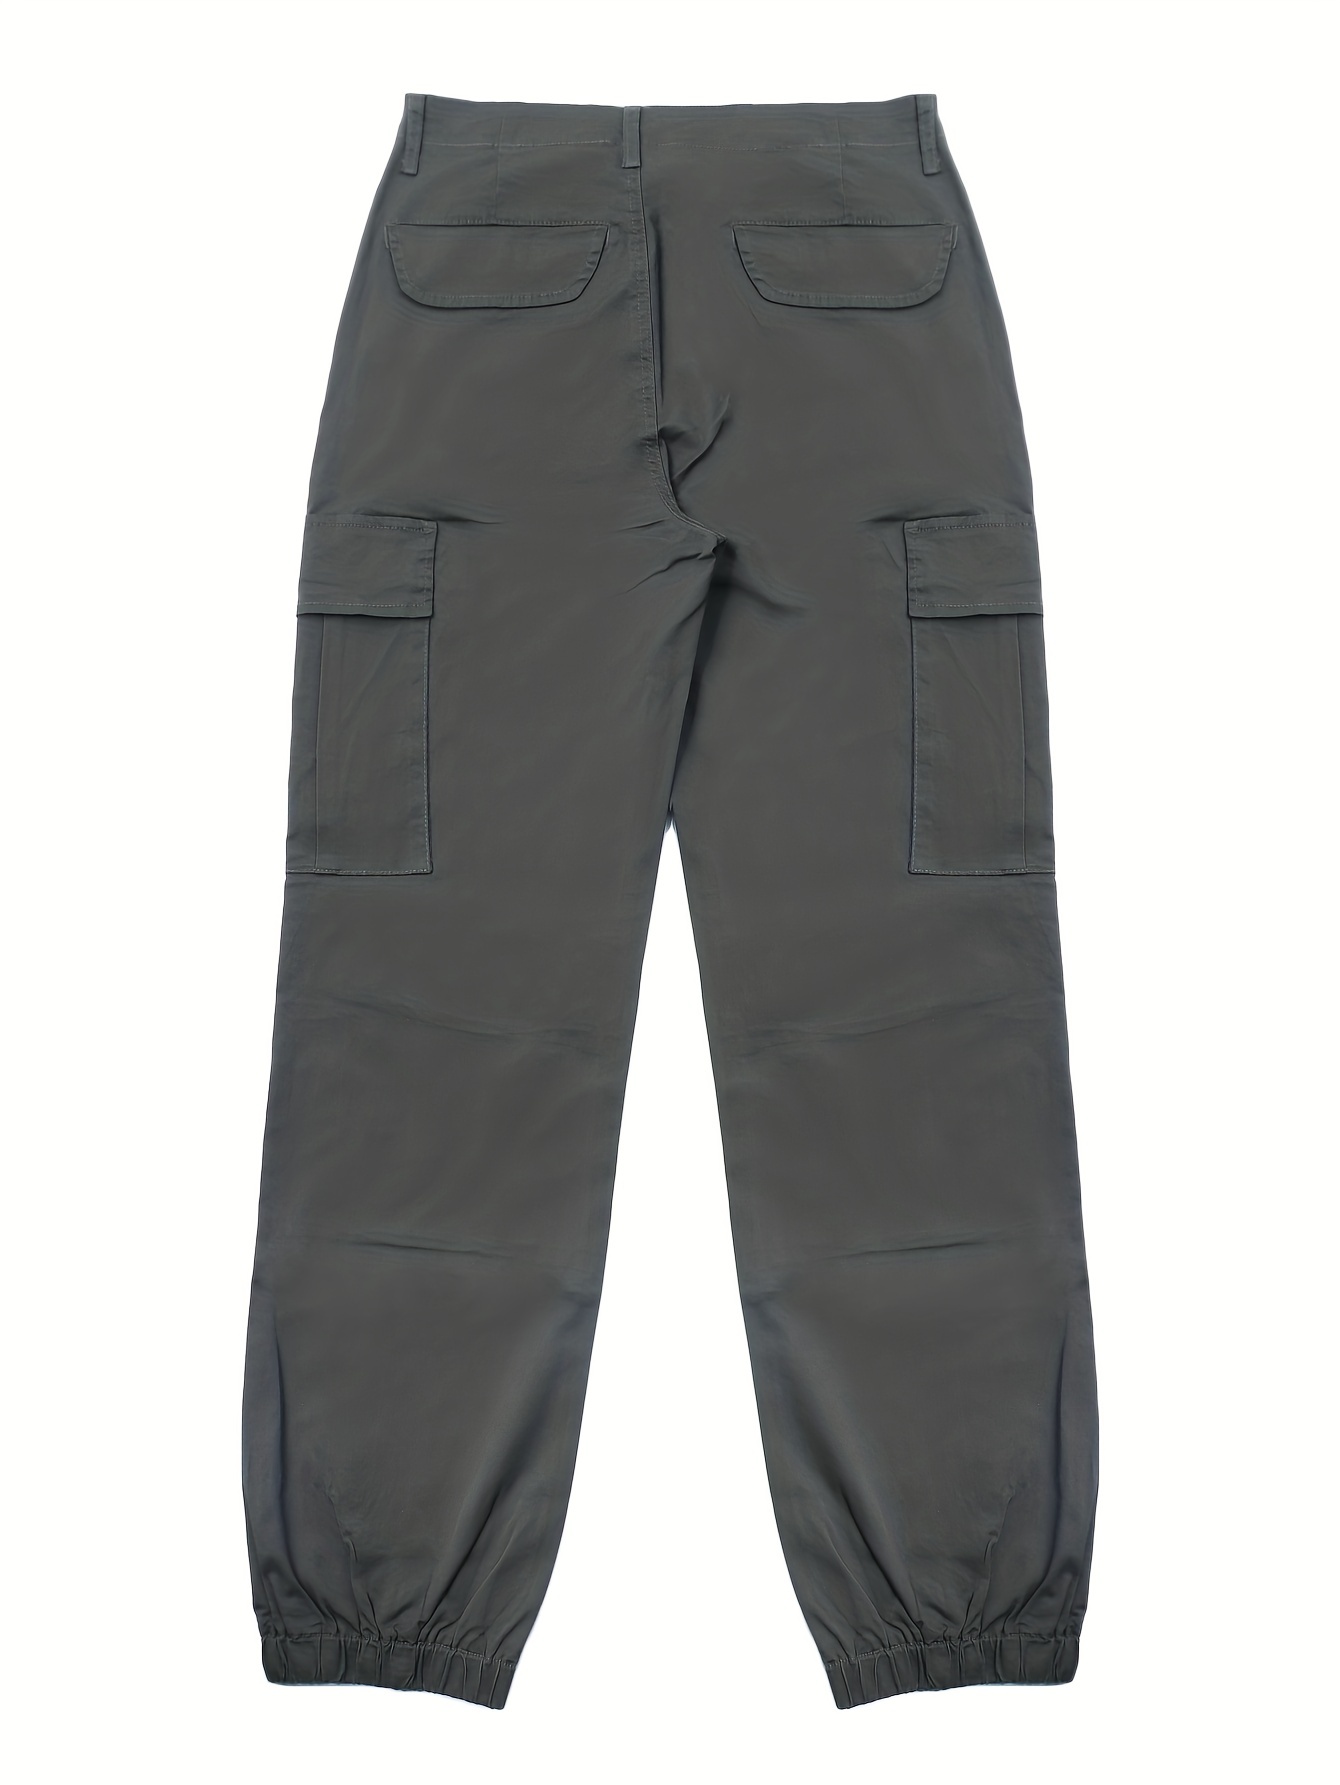 Solid Baggy Pants Pockets Full Length Casual Streetwear Trousers